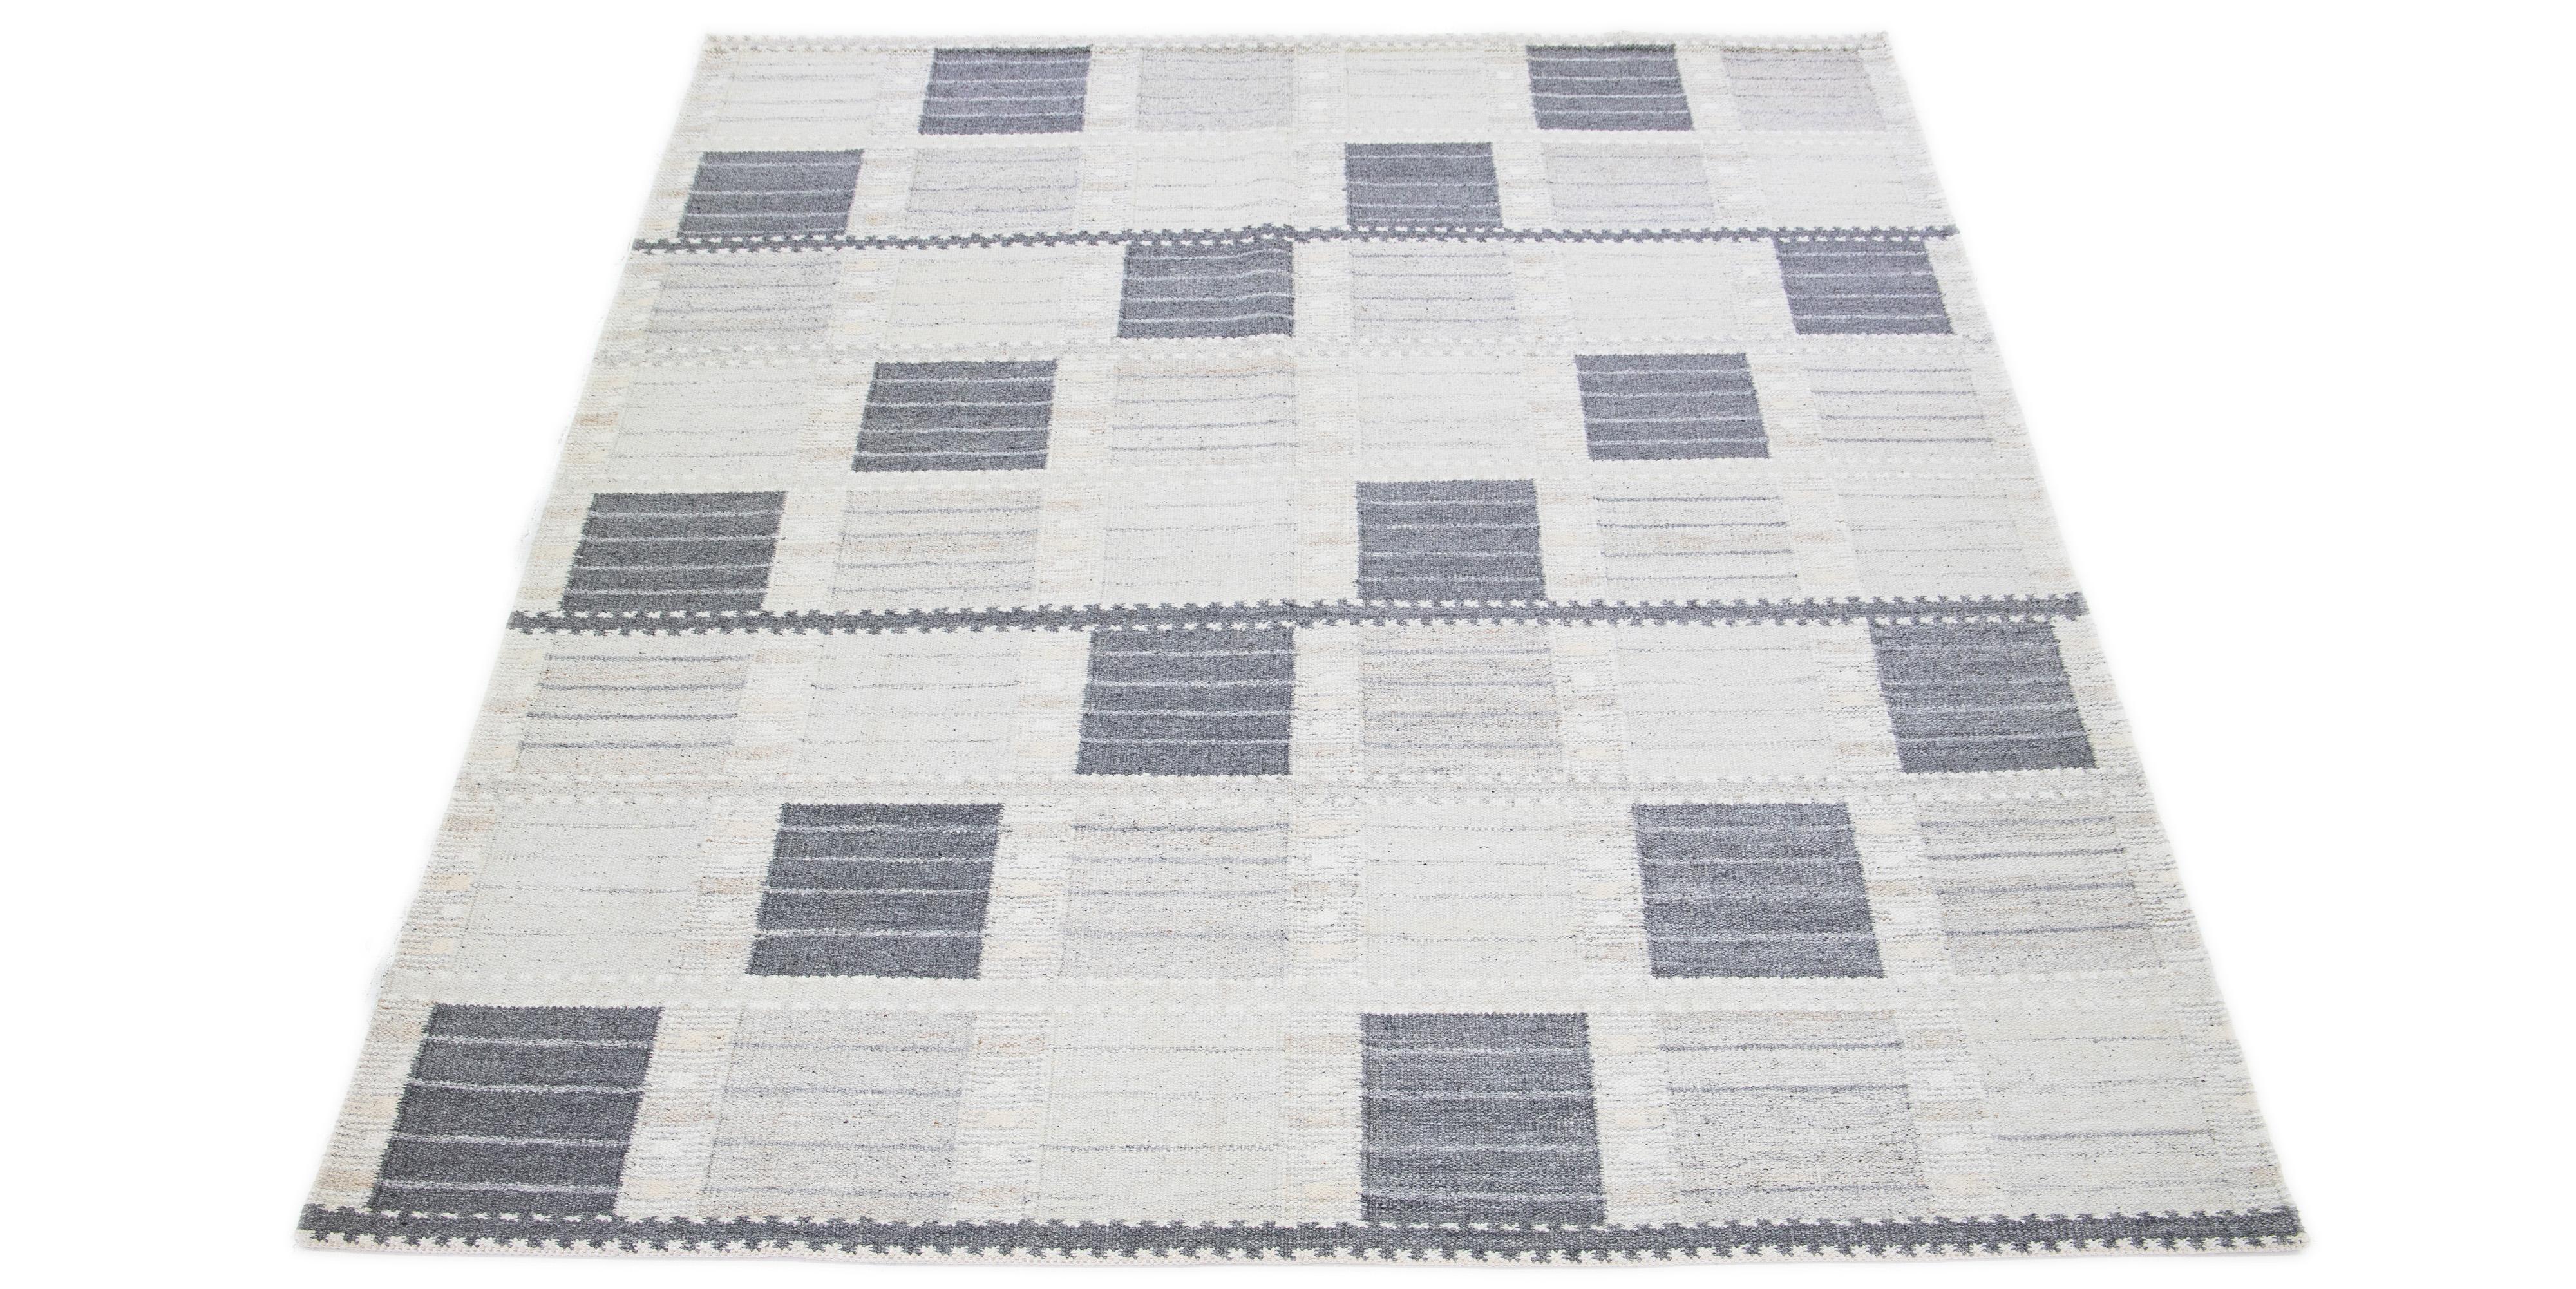 Inspired by Swedish design, this modern woolen rug features a subtle light gray backdrop. This exquisite flatweave rug is beautifully embellished with a striking geometric pattern in dark gray and beige tones.

 This rug measures 9'4